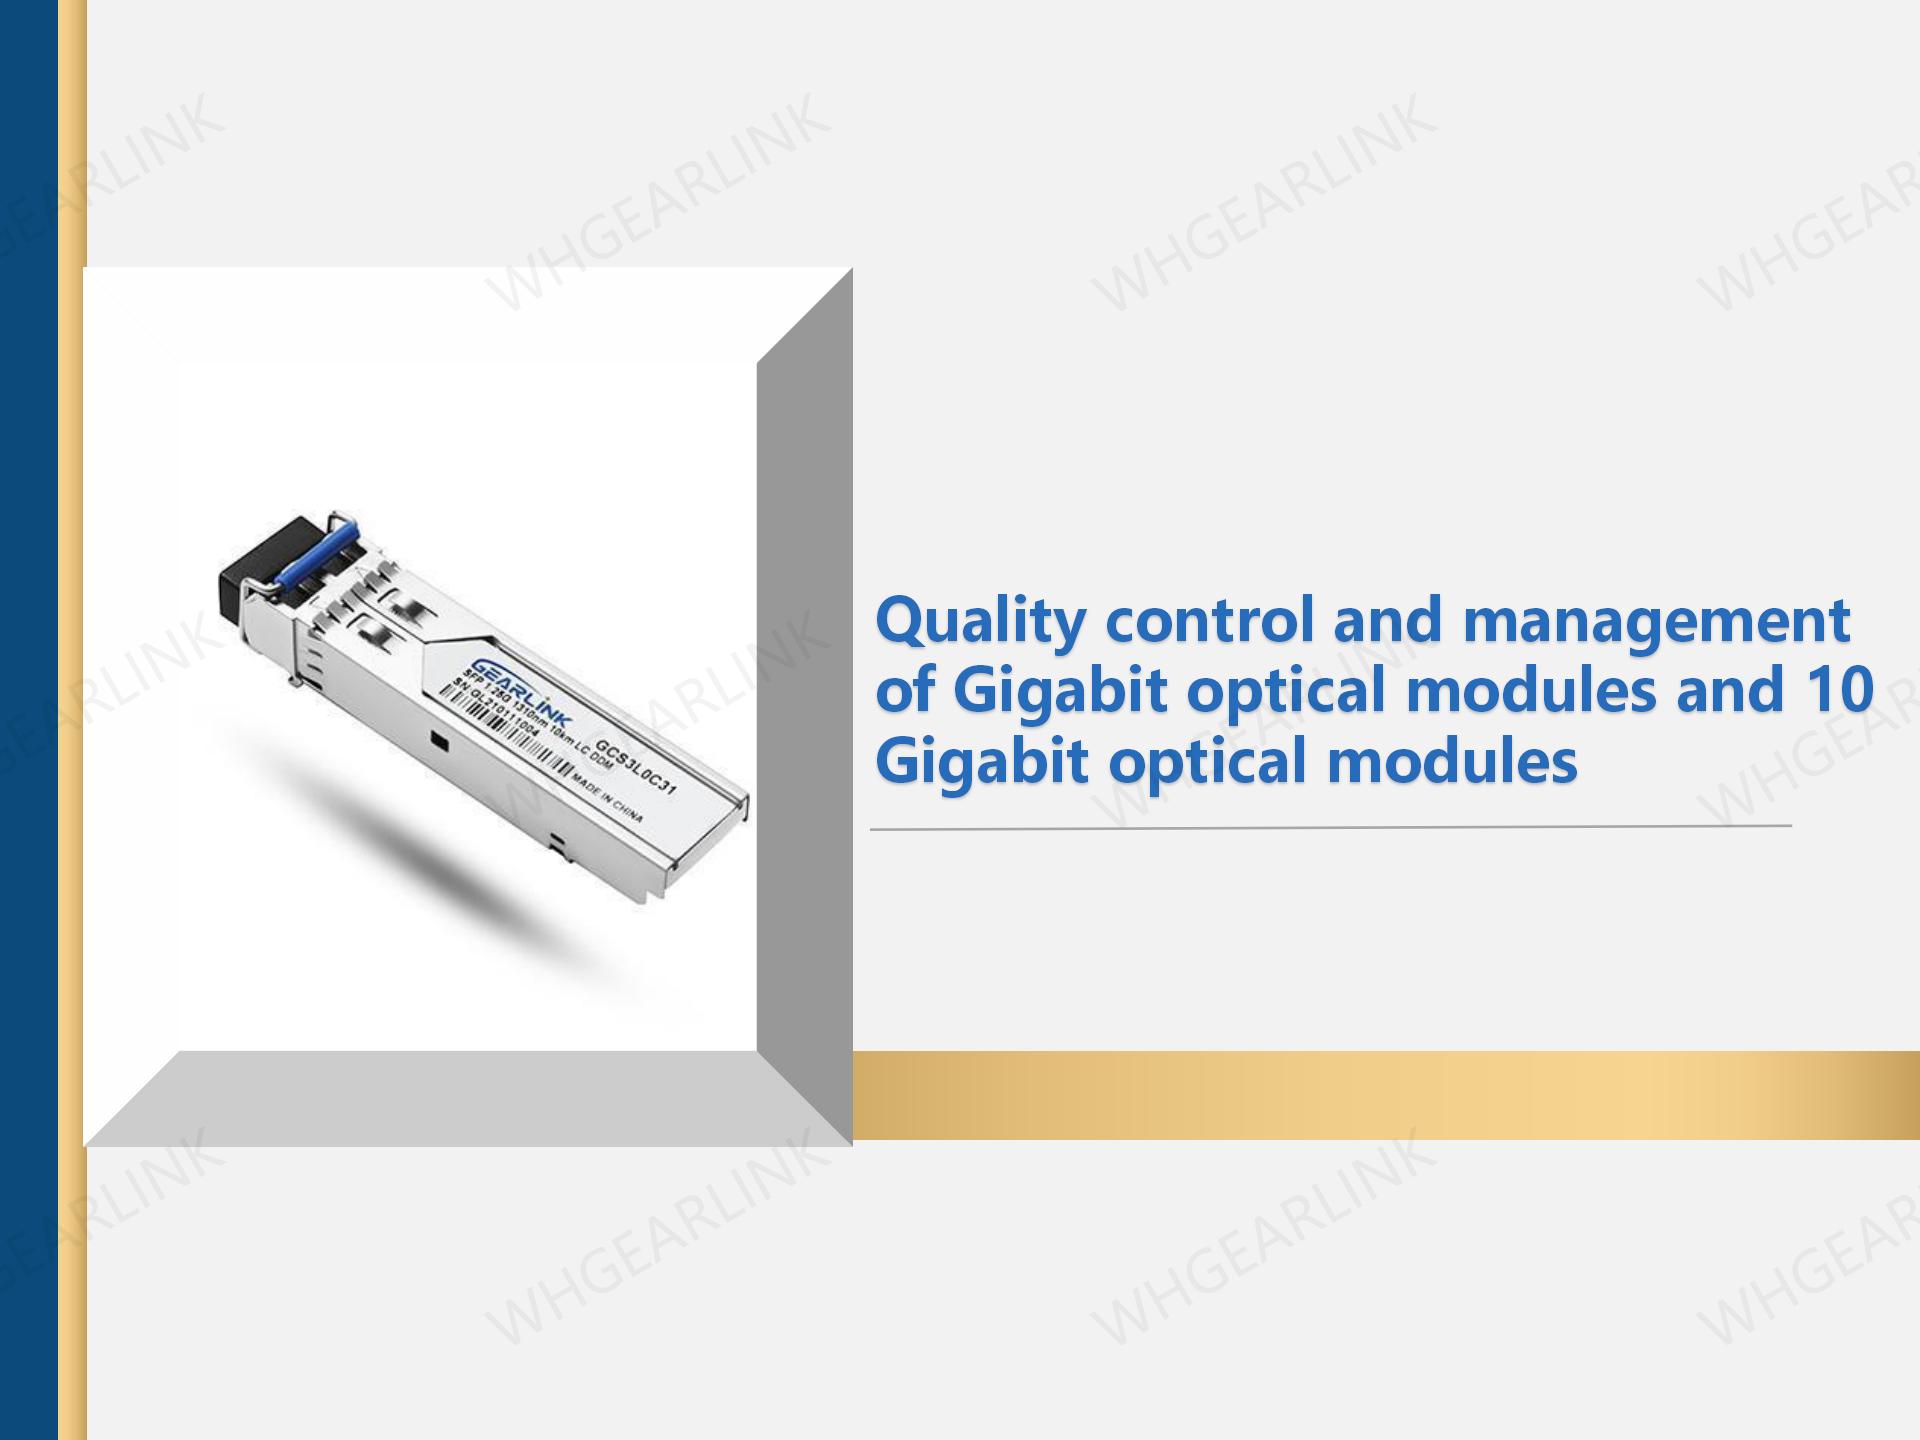 Quality control and management of Gigabit optical modules and 10 Gigabit optical modules